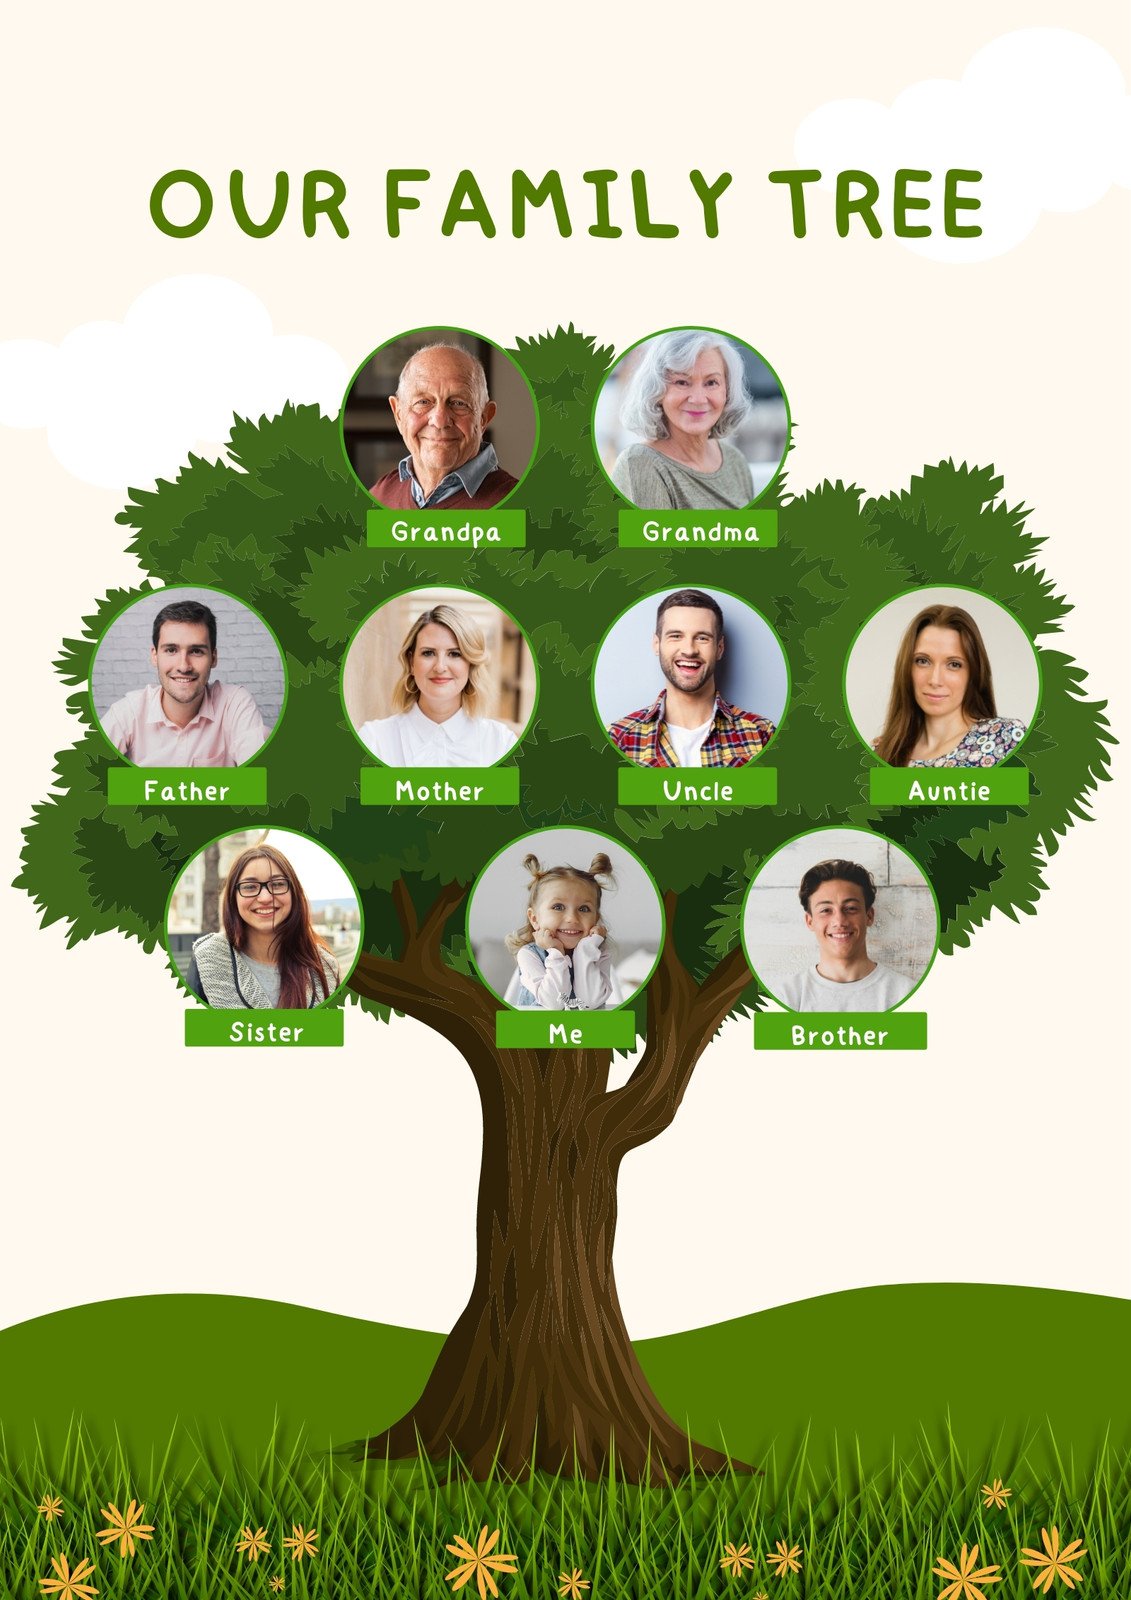 5 Reasons to make a family tree with your family